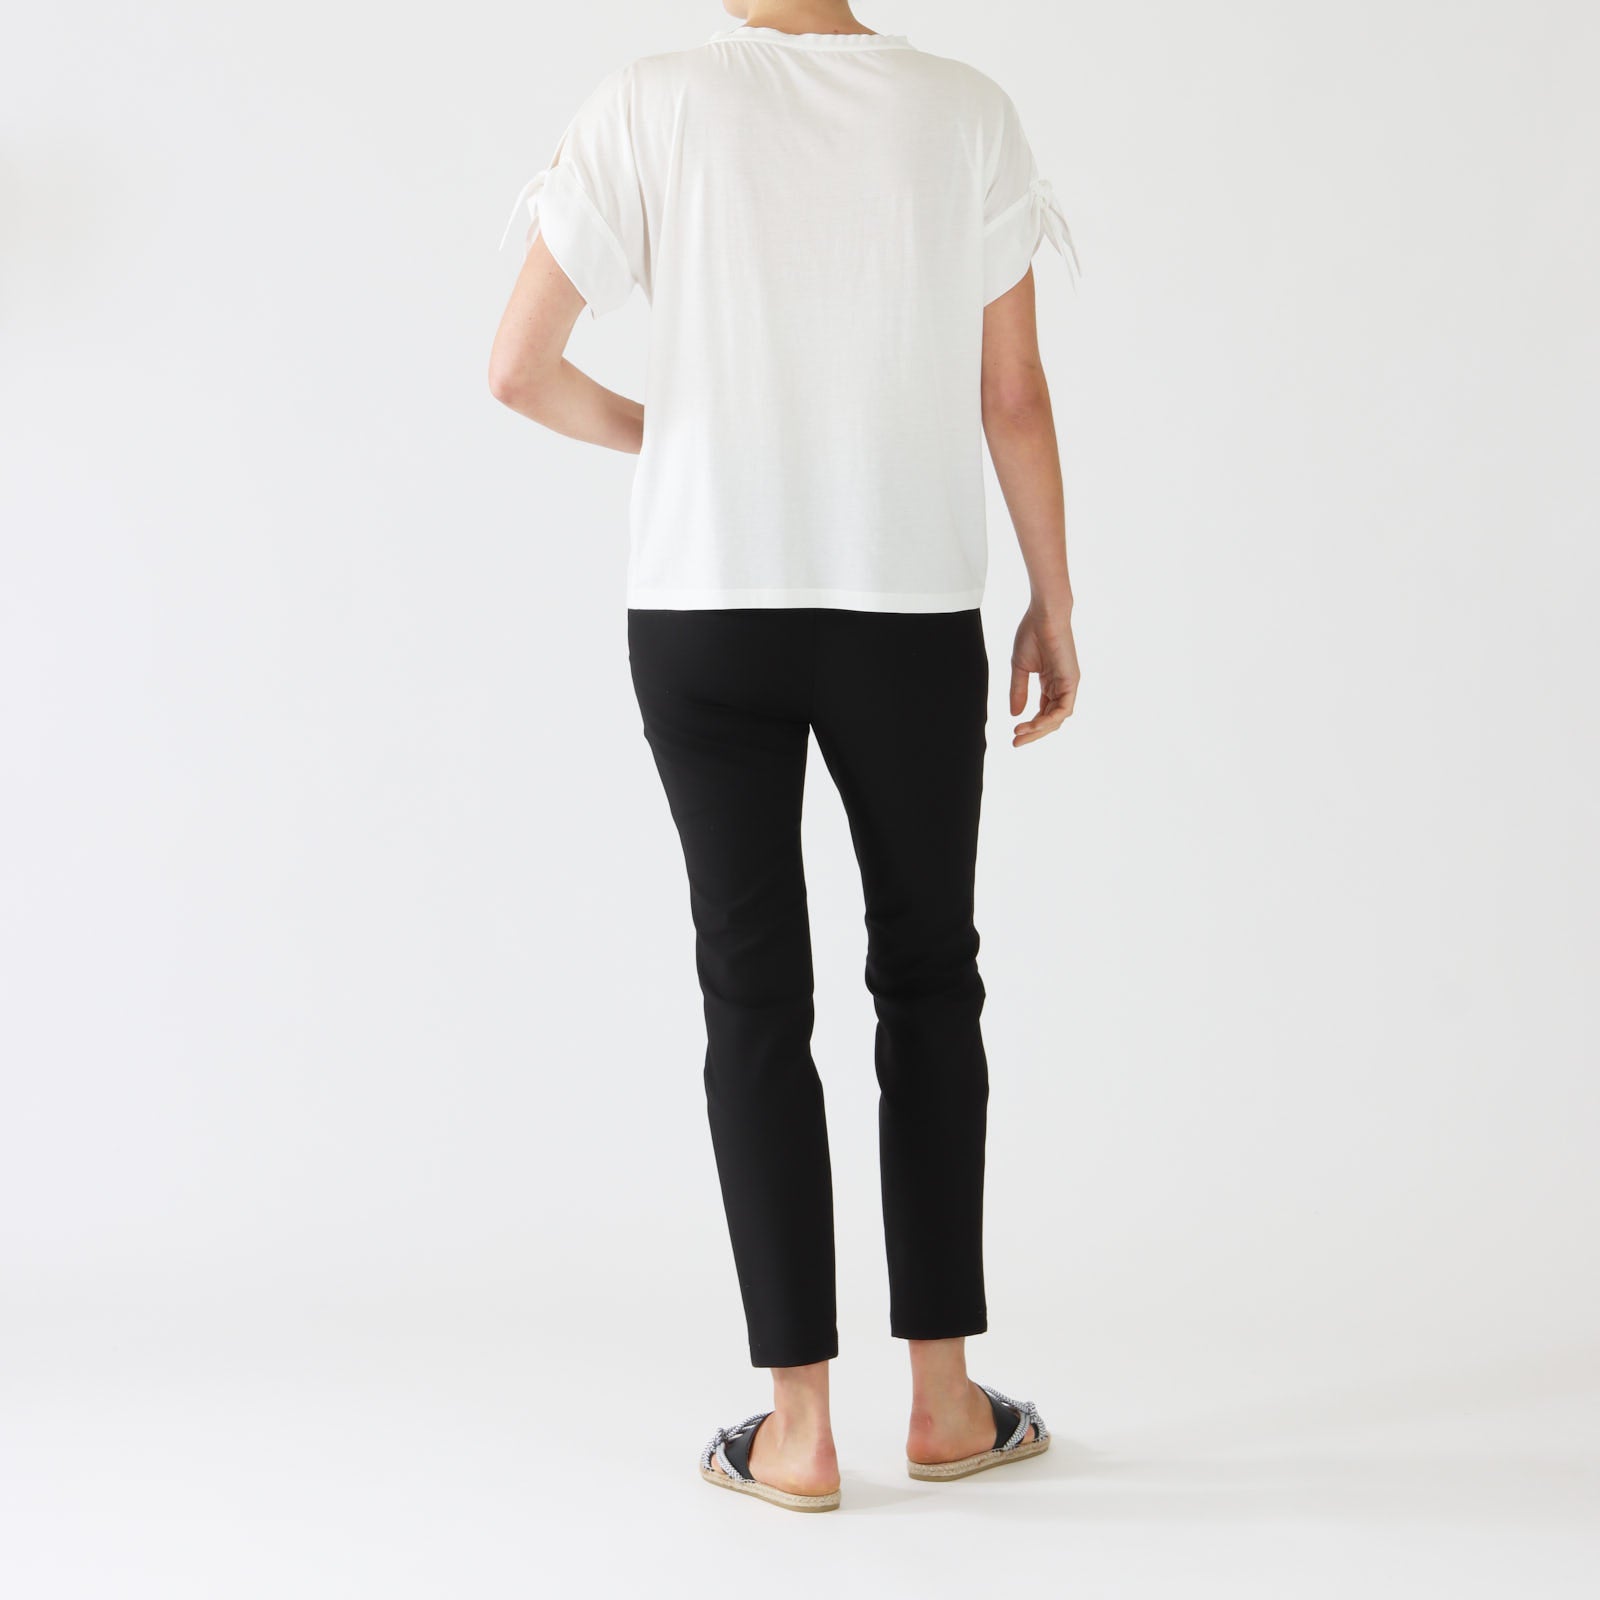 Off White Embellished Print Cotton T-Shirt